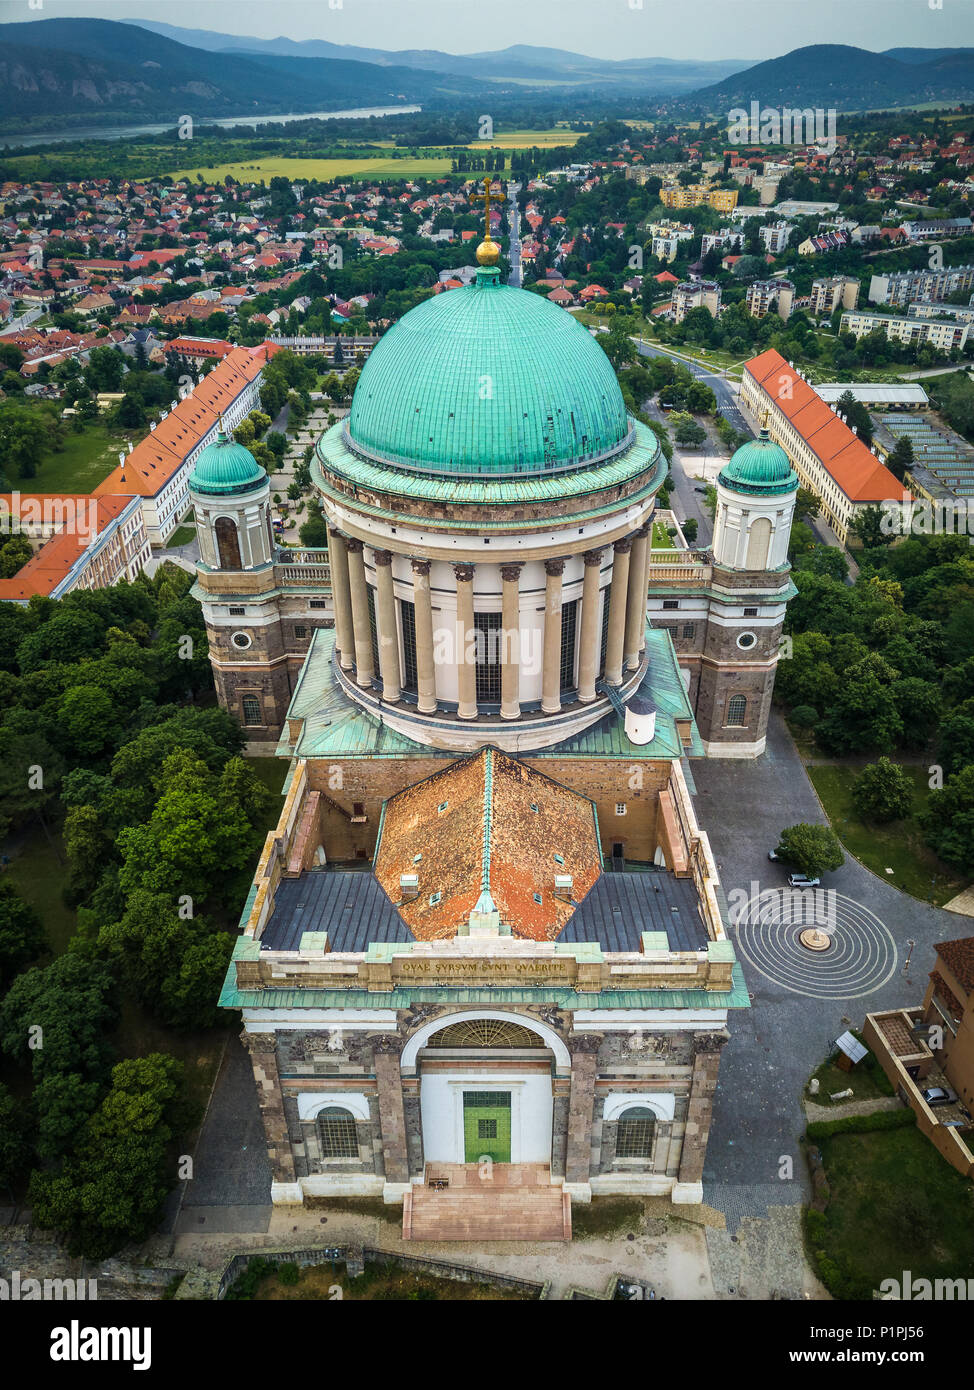 Esztergom, Hungary - Aerial view of the Primatial Basilica of the Blessed Virgin Mary Assumed Into Heaven and St Adalbert, the tallest building in Hun Stock Photo